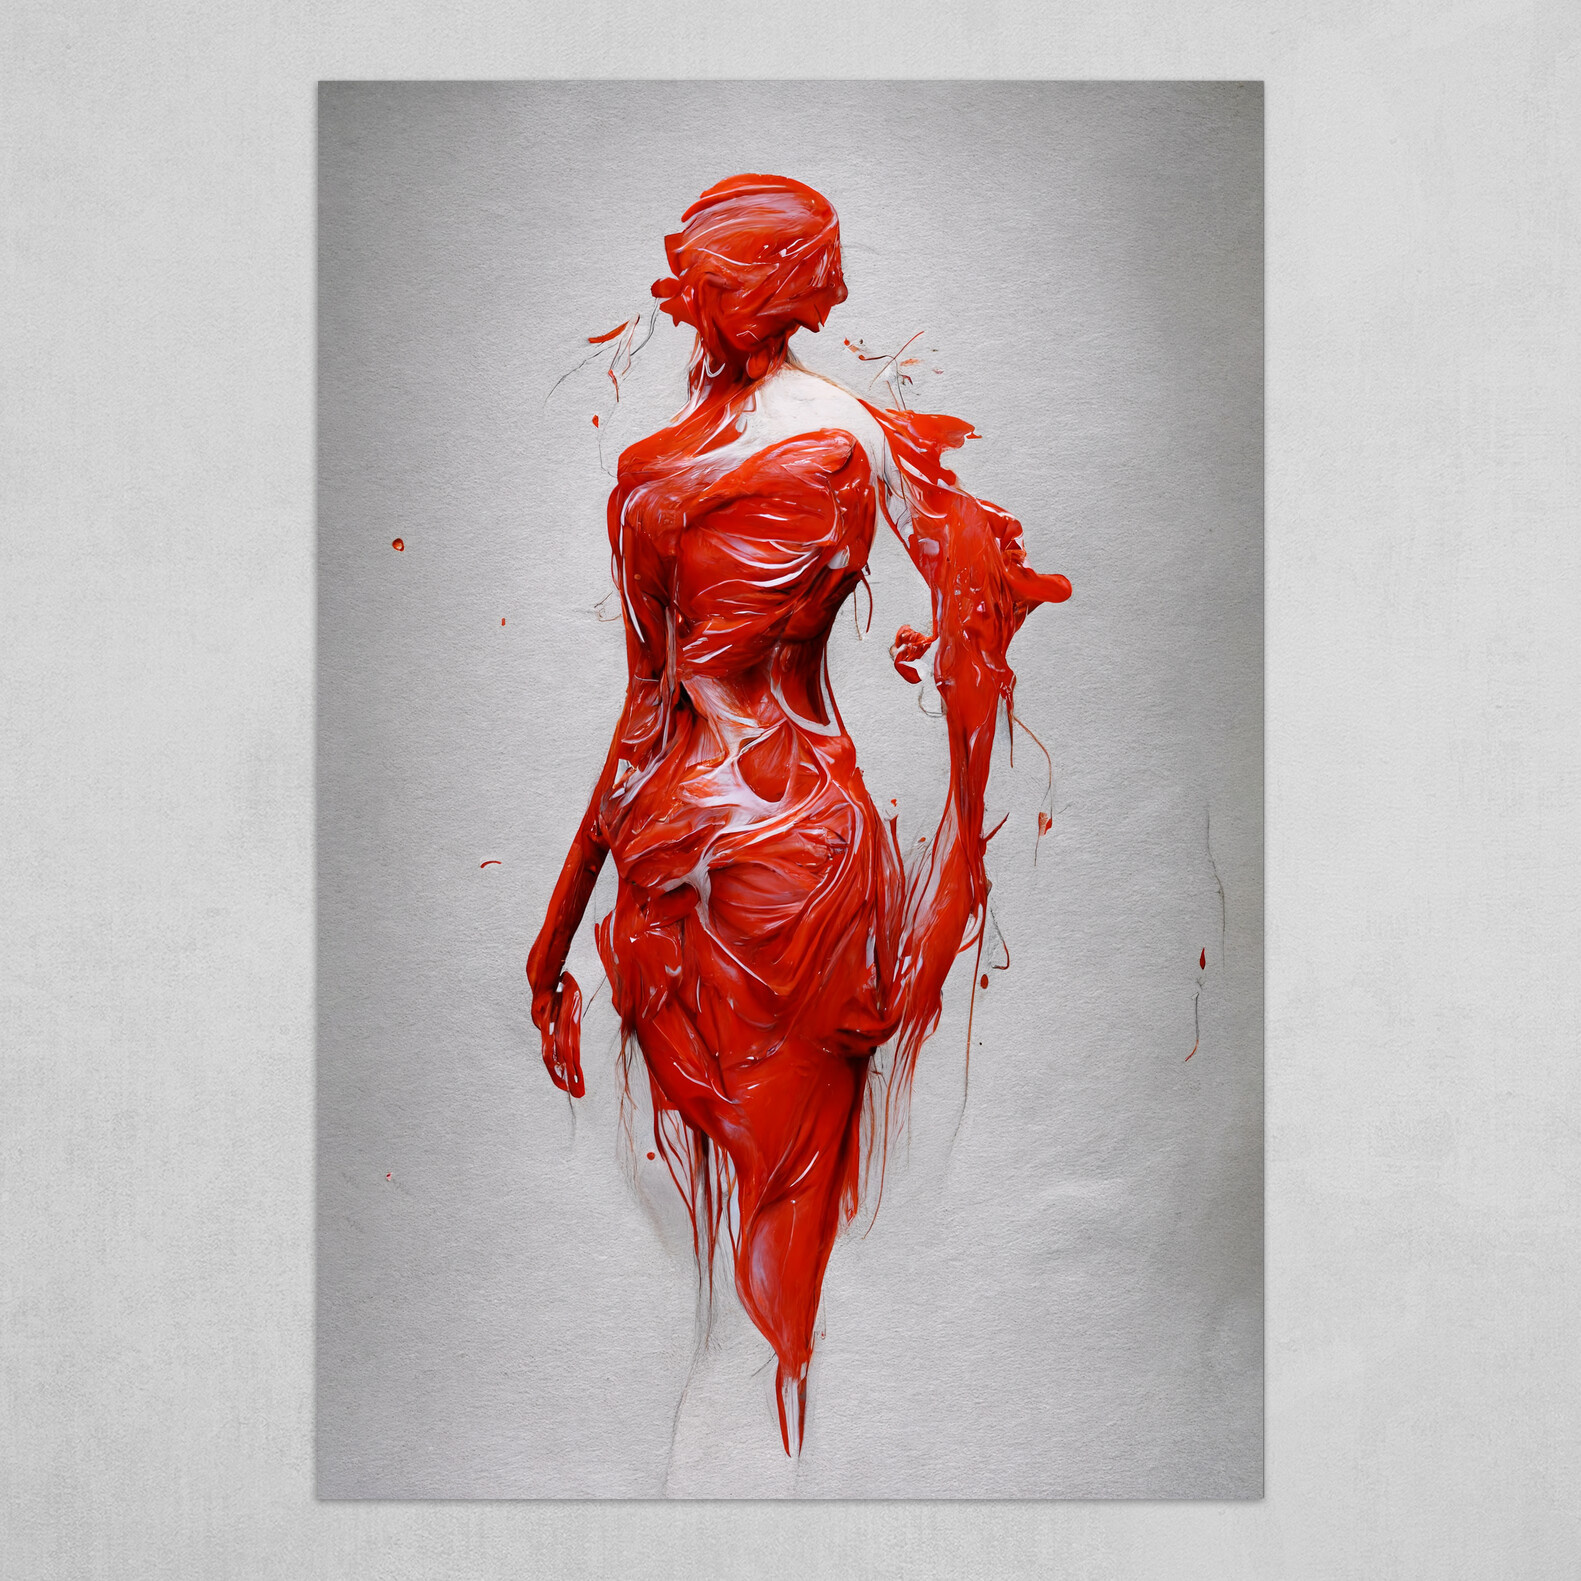 red paint dripping